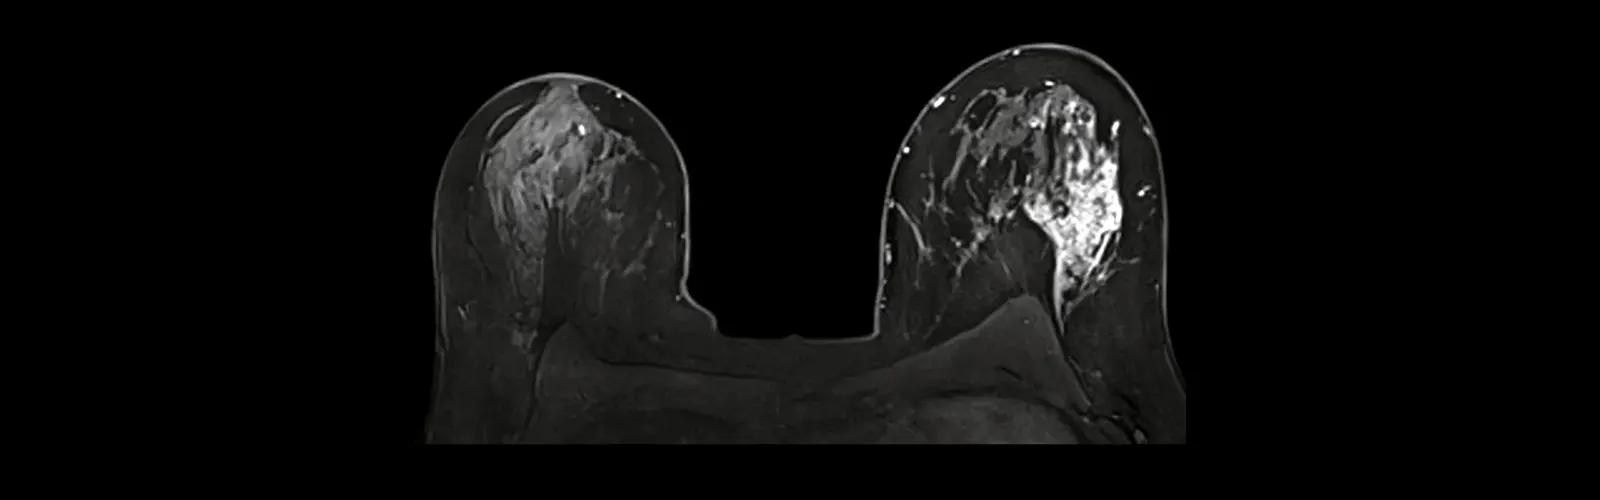 What Is The Purpose Of MR Mammography?